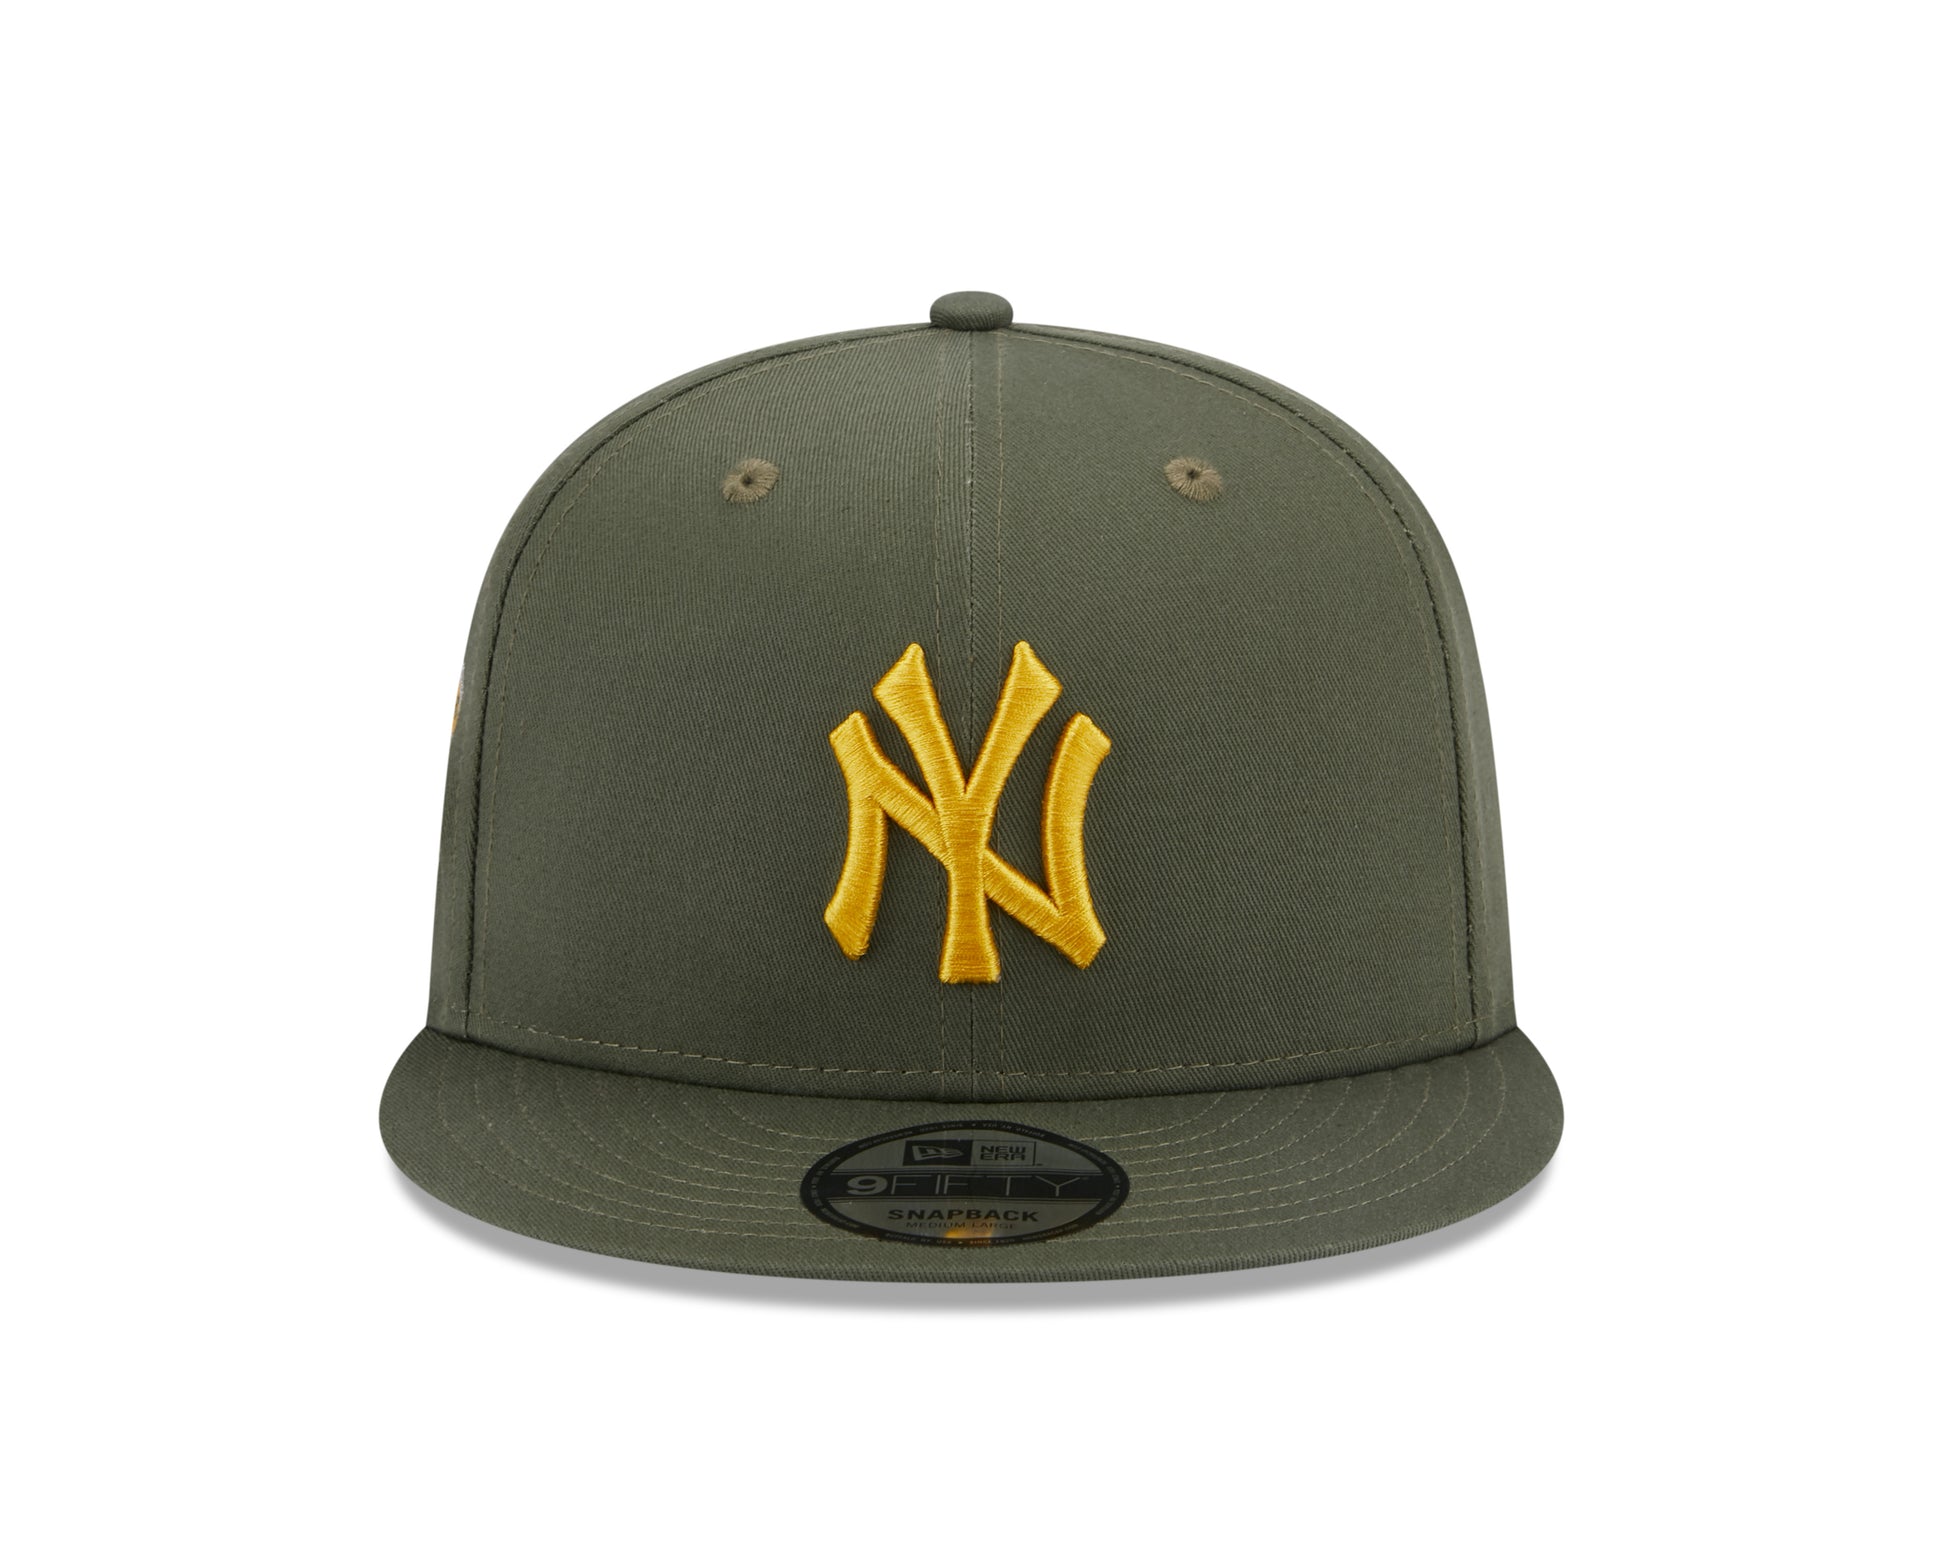 New Era 9Fifty Side Patch New York Yankees - Olive/Yellow - Headz Up 